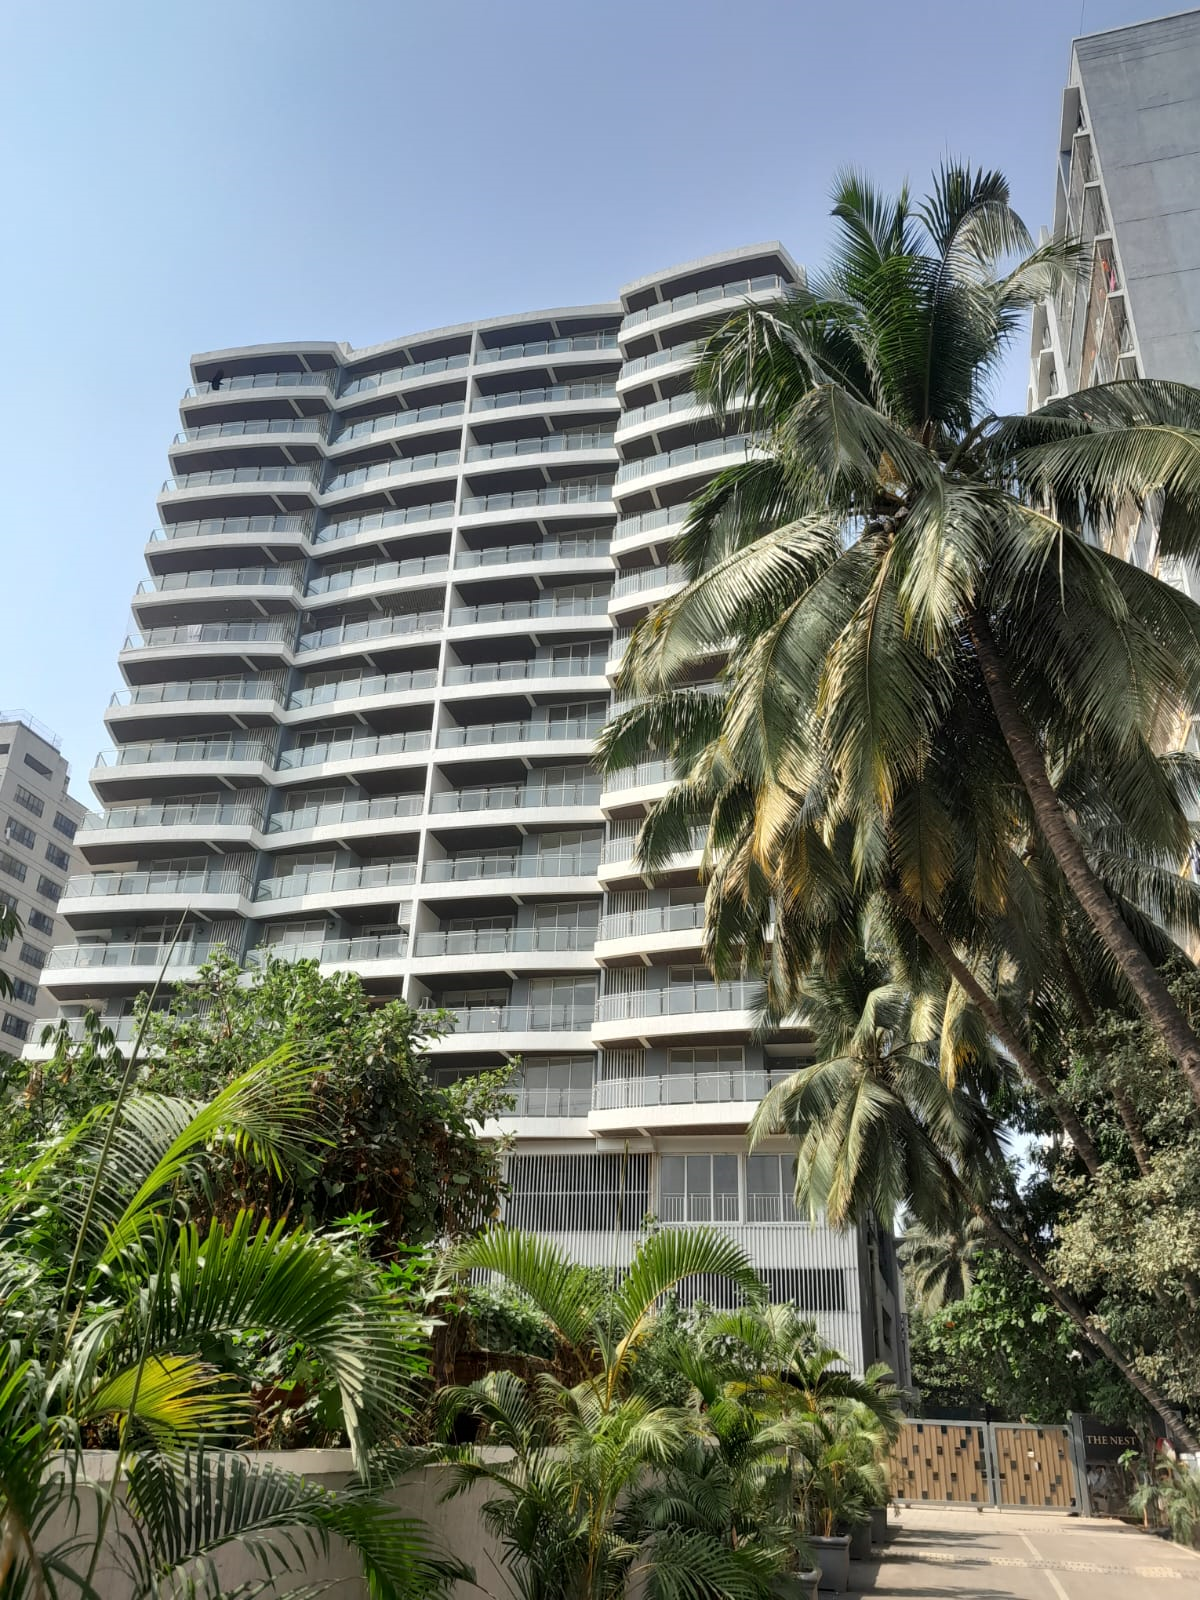 3 BHK Flat for Sale in Andheri West - The Nest